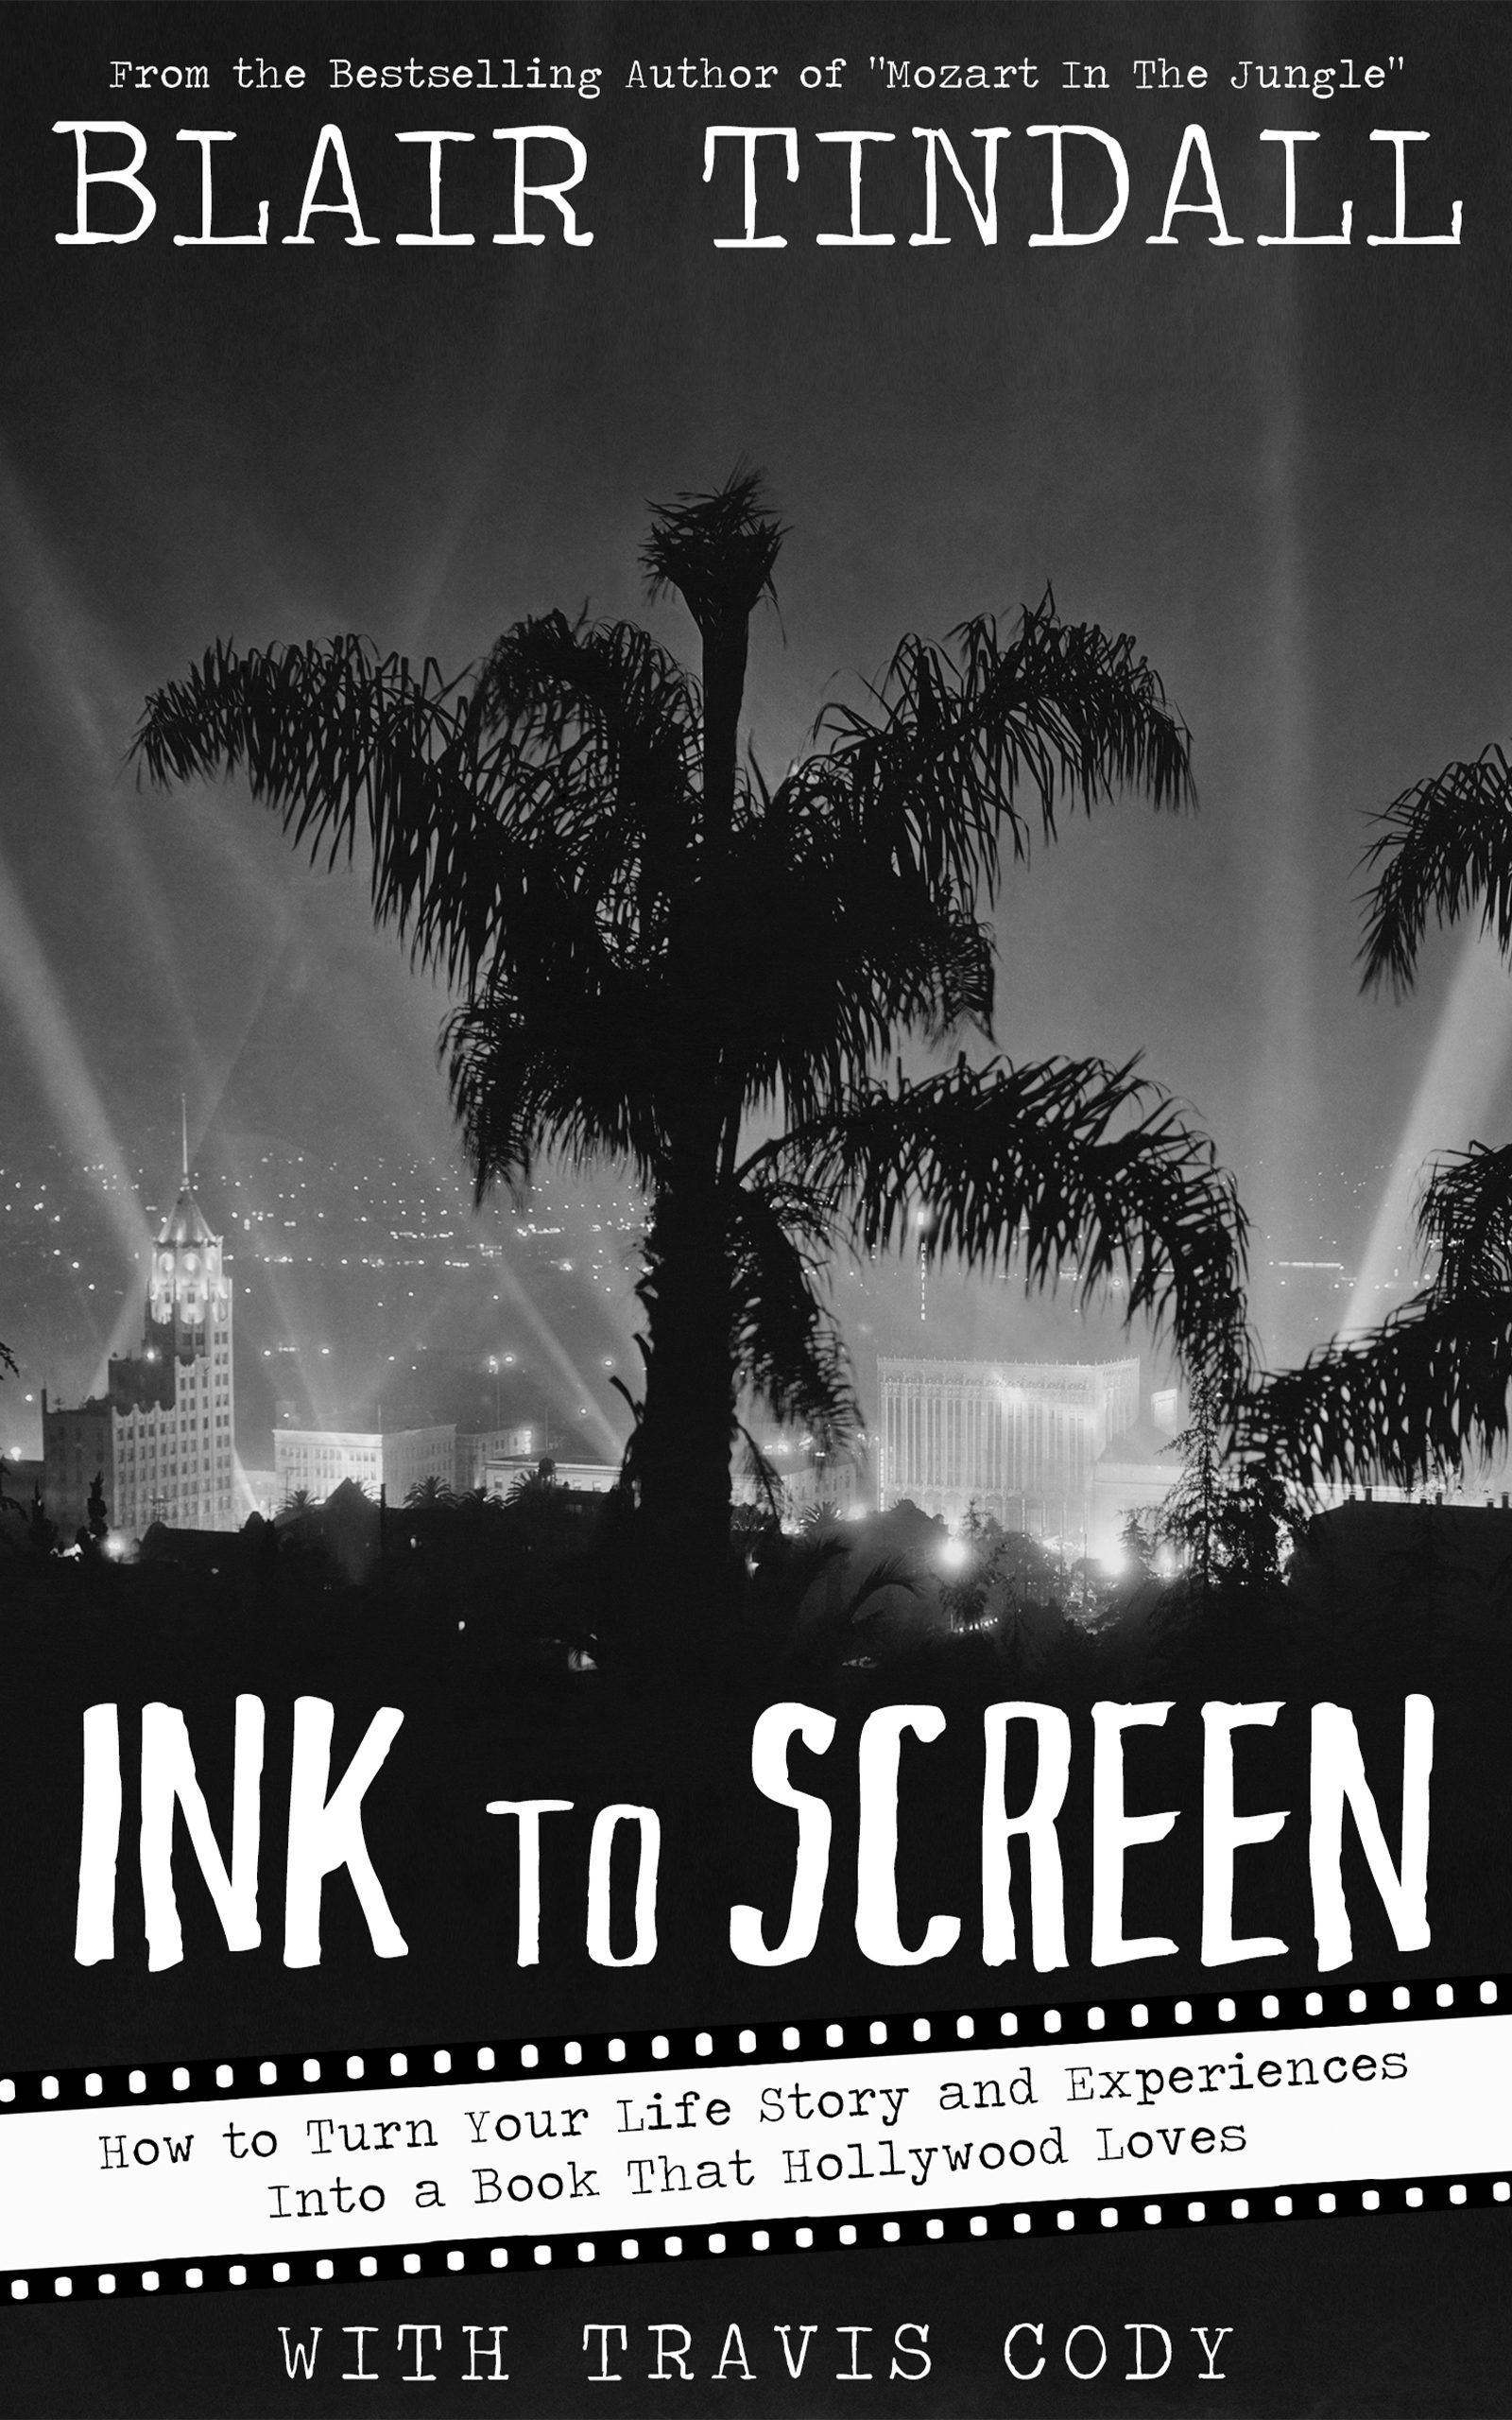 Ink To Screen